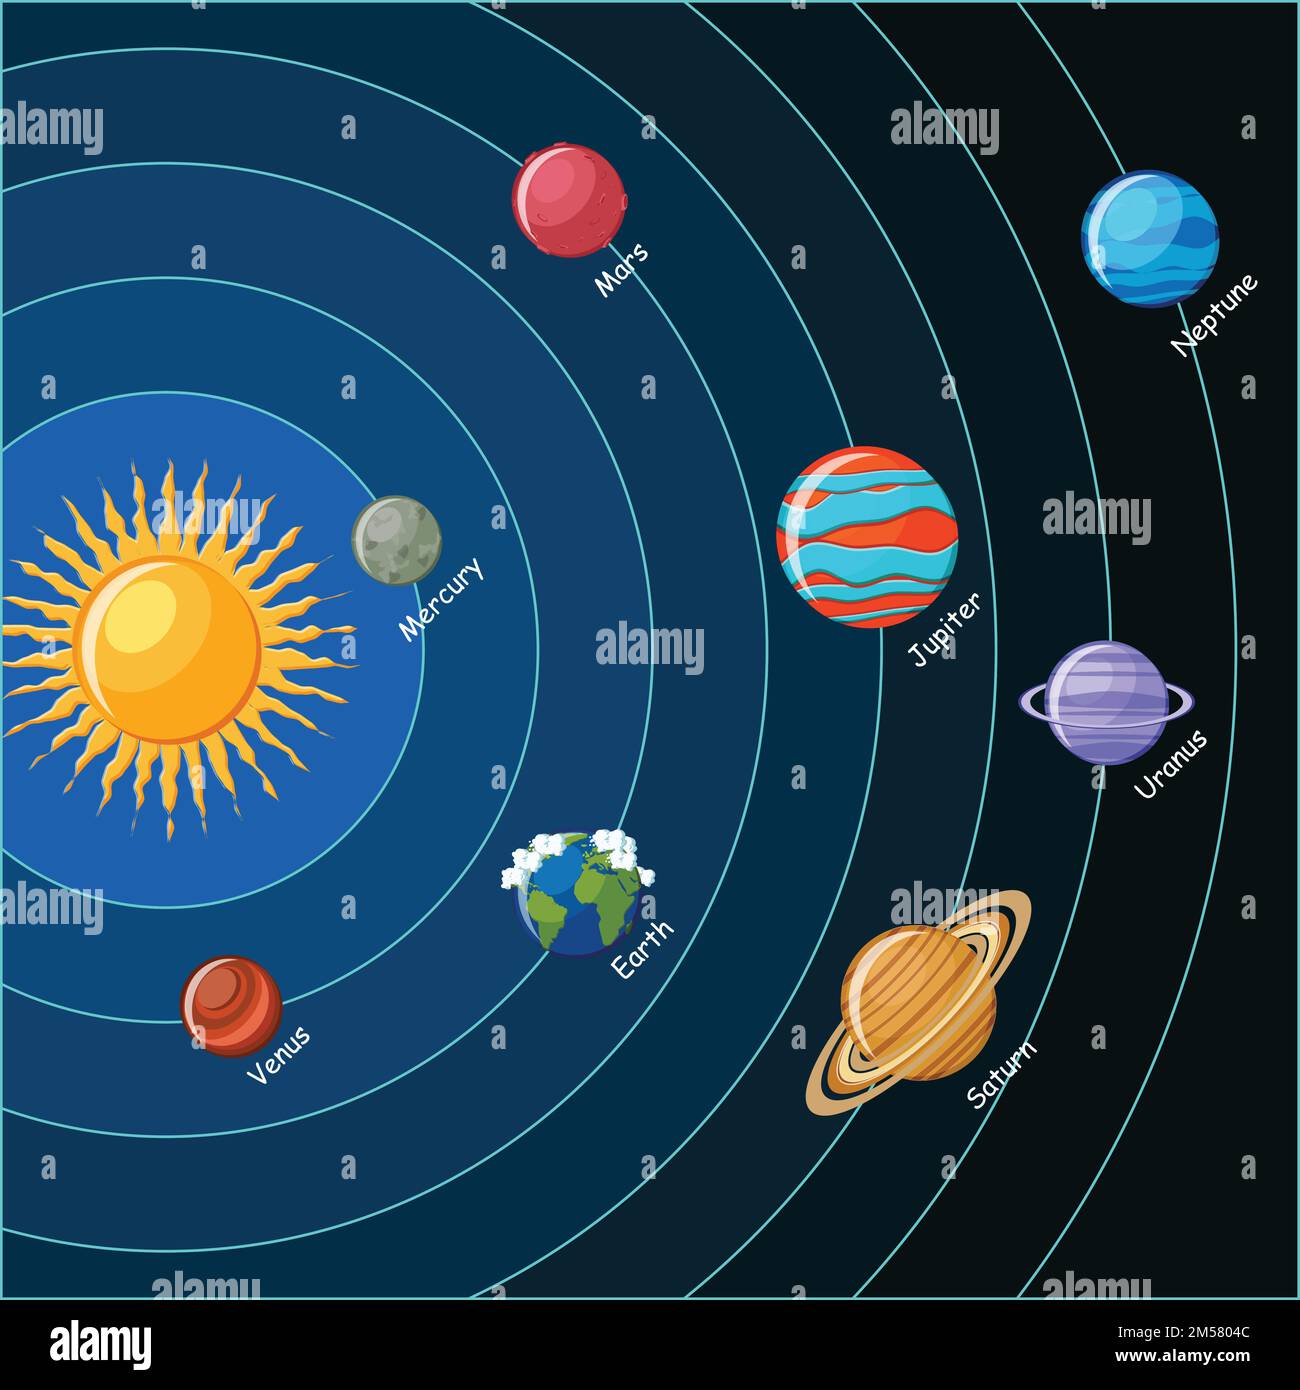 Solar system. Planets with orbits around the sun. Educational astronomy ...